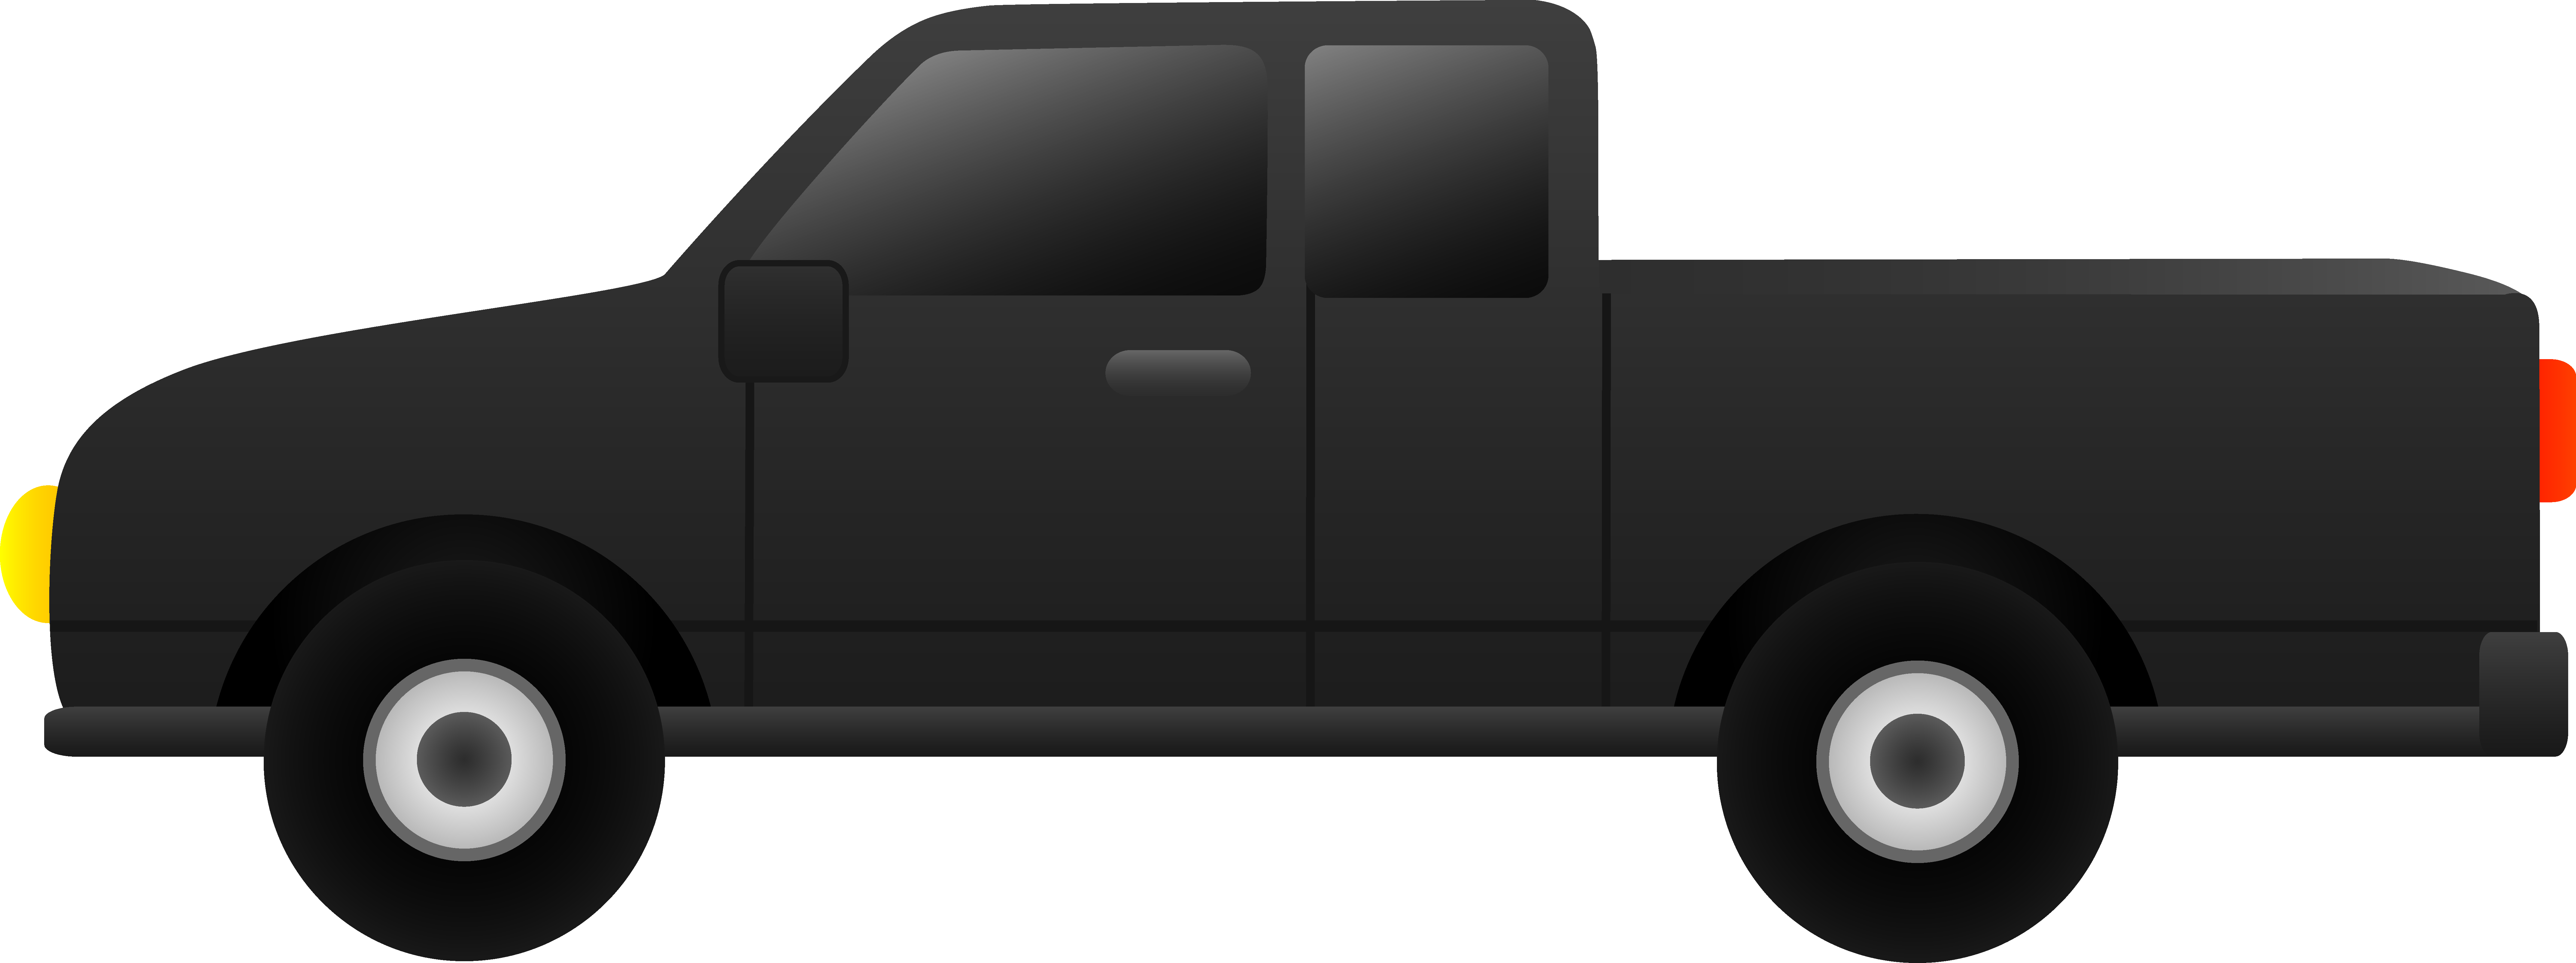 Pick Up Truck Silhouette #1540399 (License: Personal Use) .